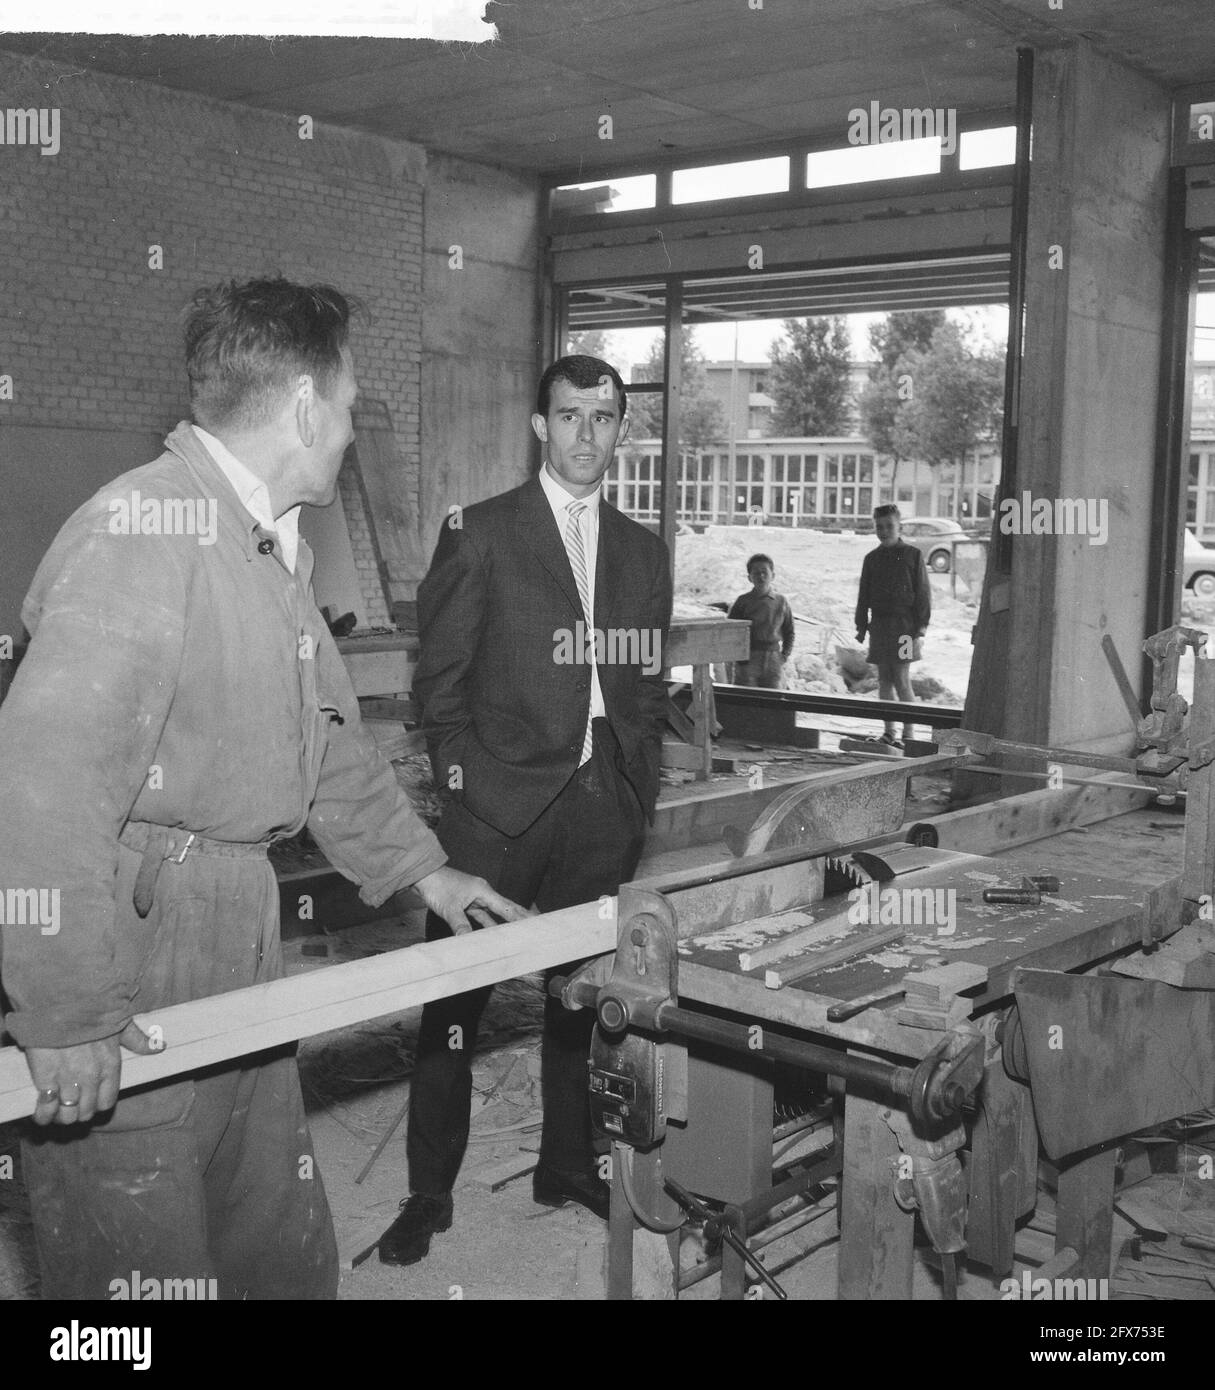 Coen Moulijn in his store under construction, June 1, 1961, construction, soccer, stores, The Netherlands, 20th century press agency photo, news to remember, documentary, historic photography 1945-1990, visual stories, human history of the Twentieth Century, capturing moments in time Stock Photo